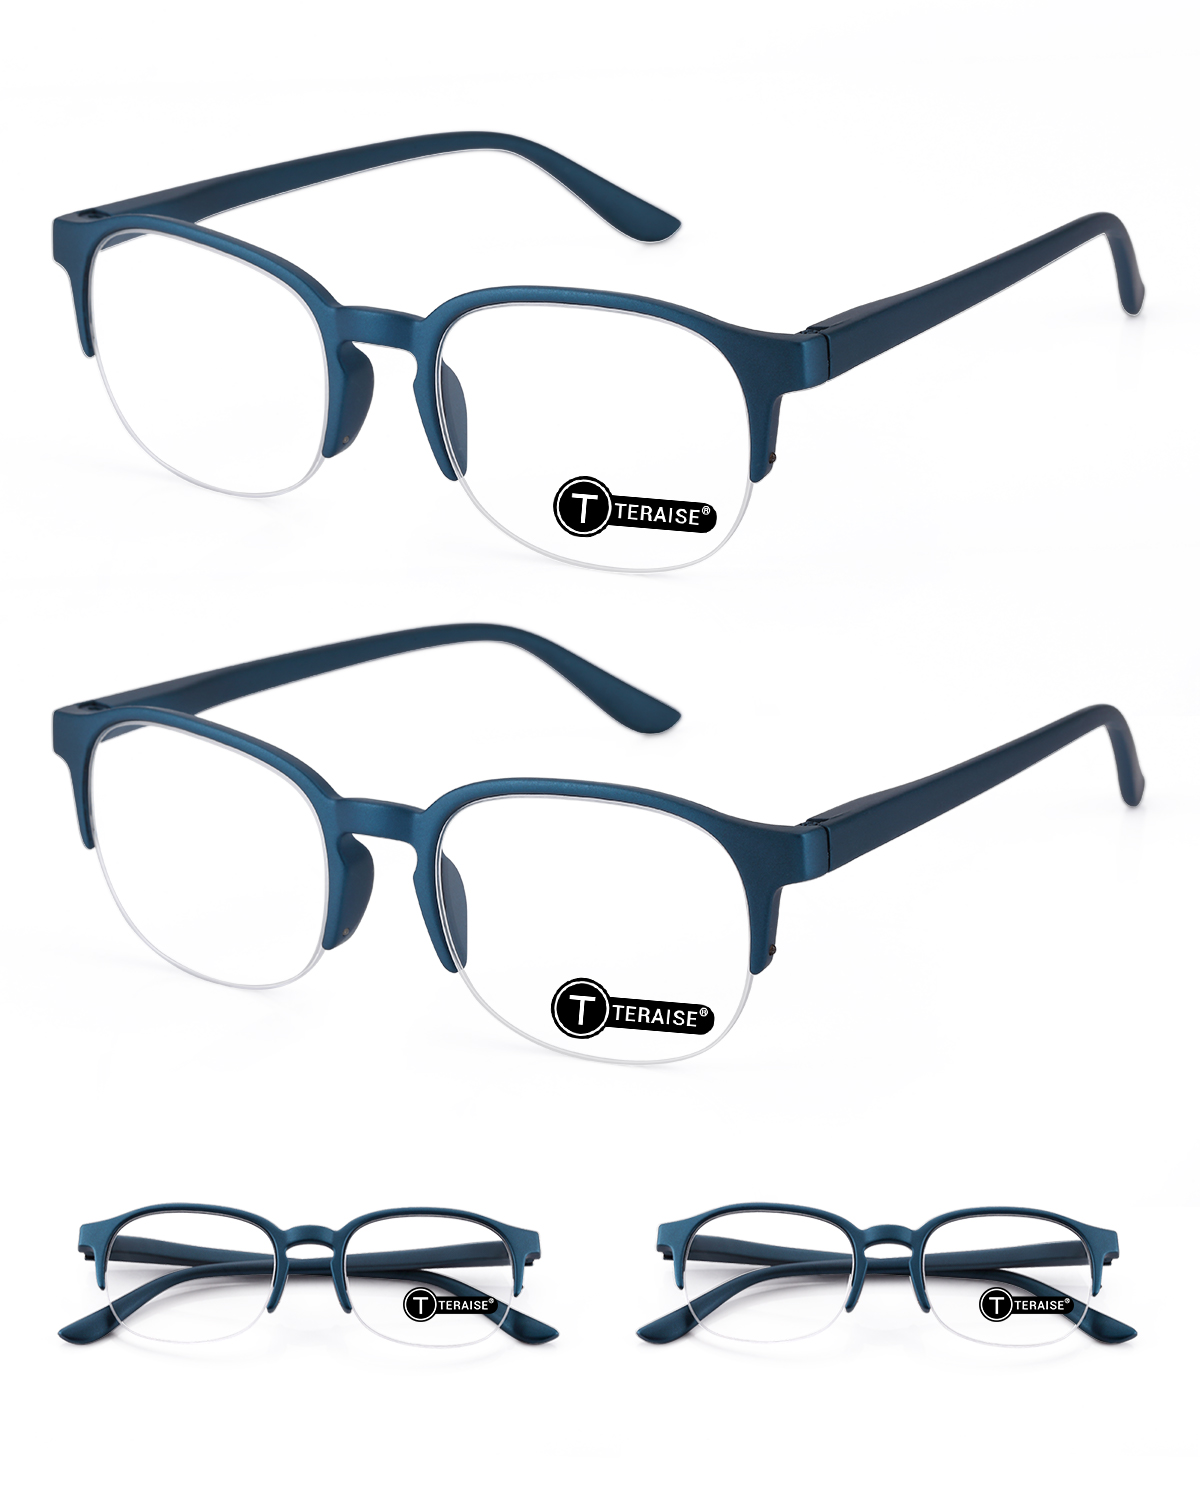 TERAISE Blue Light Reading Glasses for Women/Men - 4 pairs Readers with Spring Hinge,Reduce Eye Fatigue,Lightweight Fashion Blue Frame Computer Eyeglasses-TERAISE